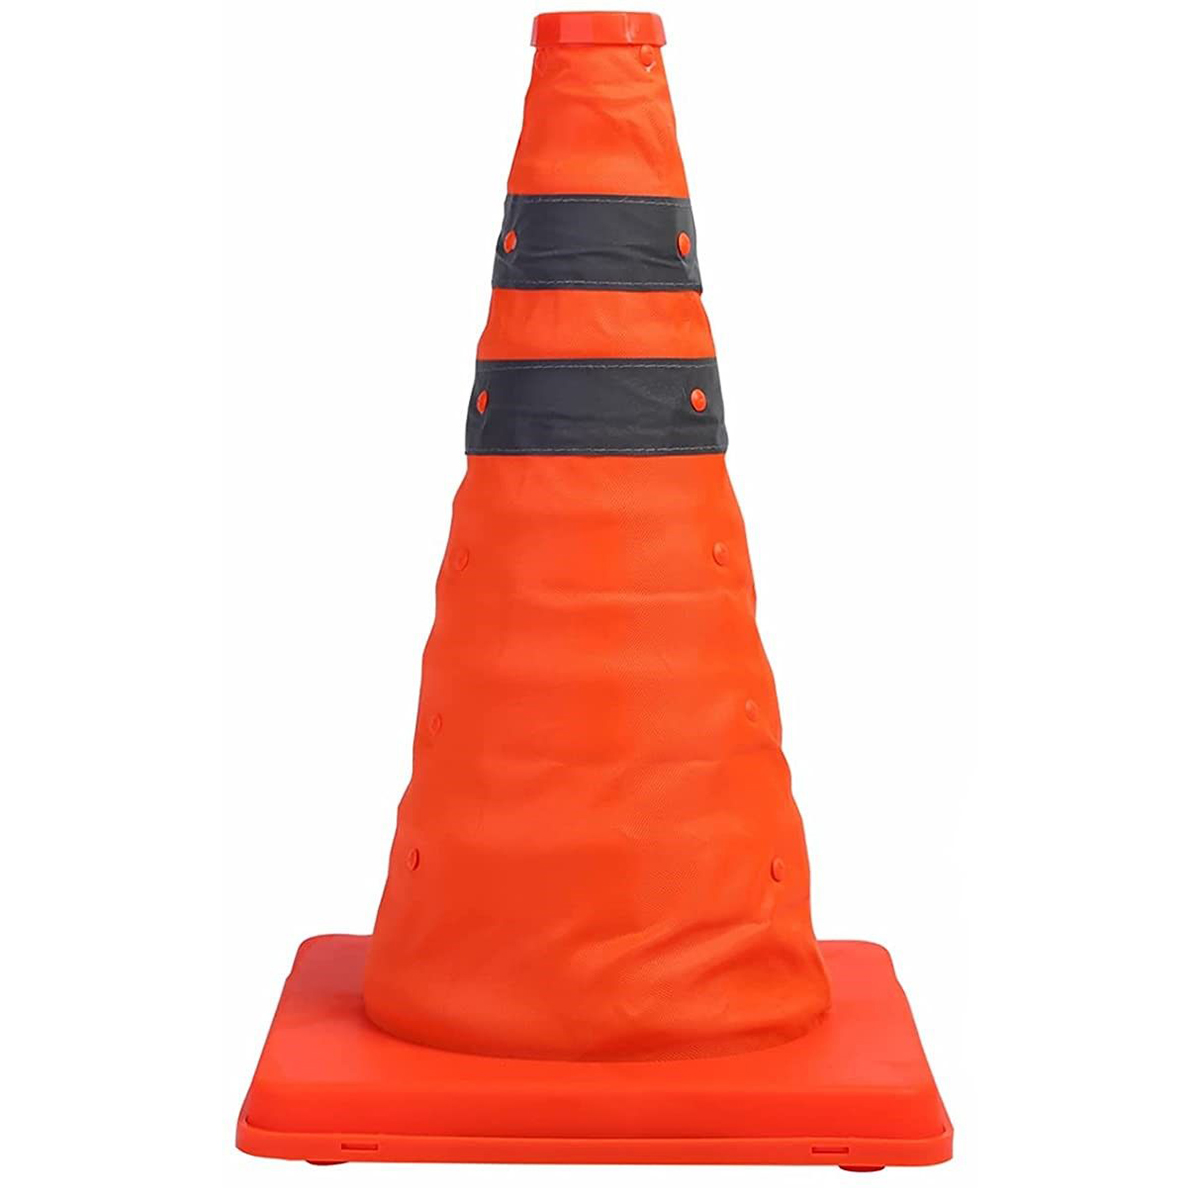 Goodyear Large Pop-Up Safety Cone GY3019 Traffic Cone for Parking Single Collapsible Reflective Pylon 15.7 Inches Tall - Orange